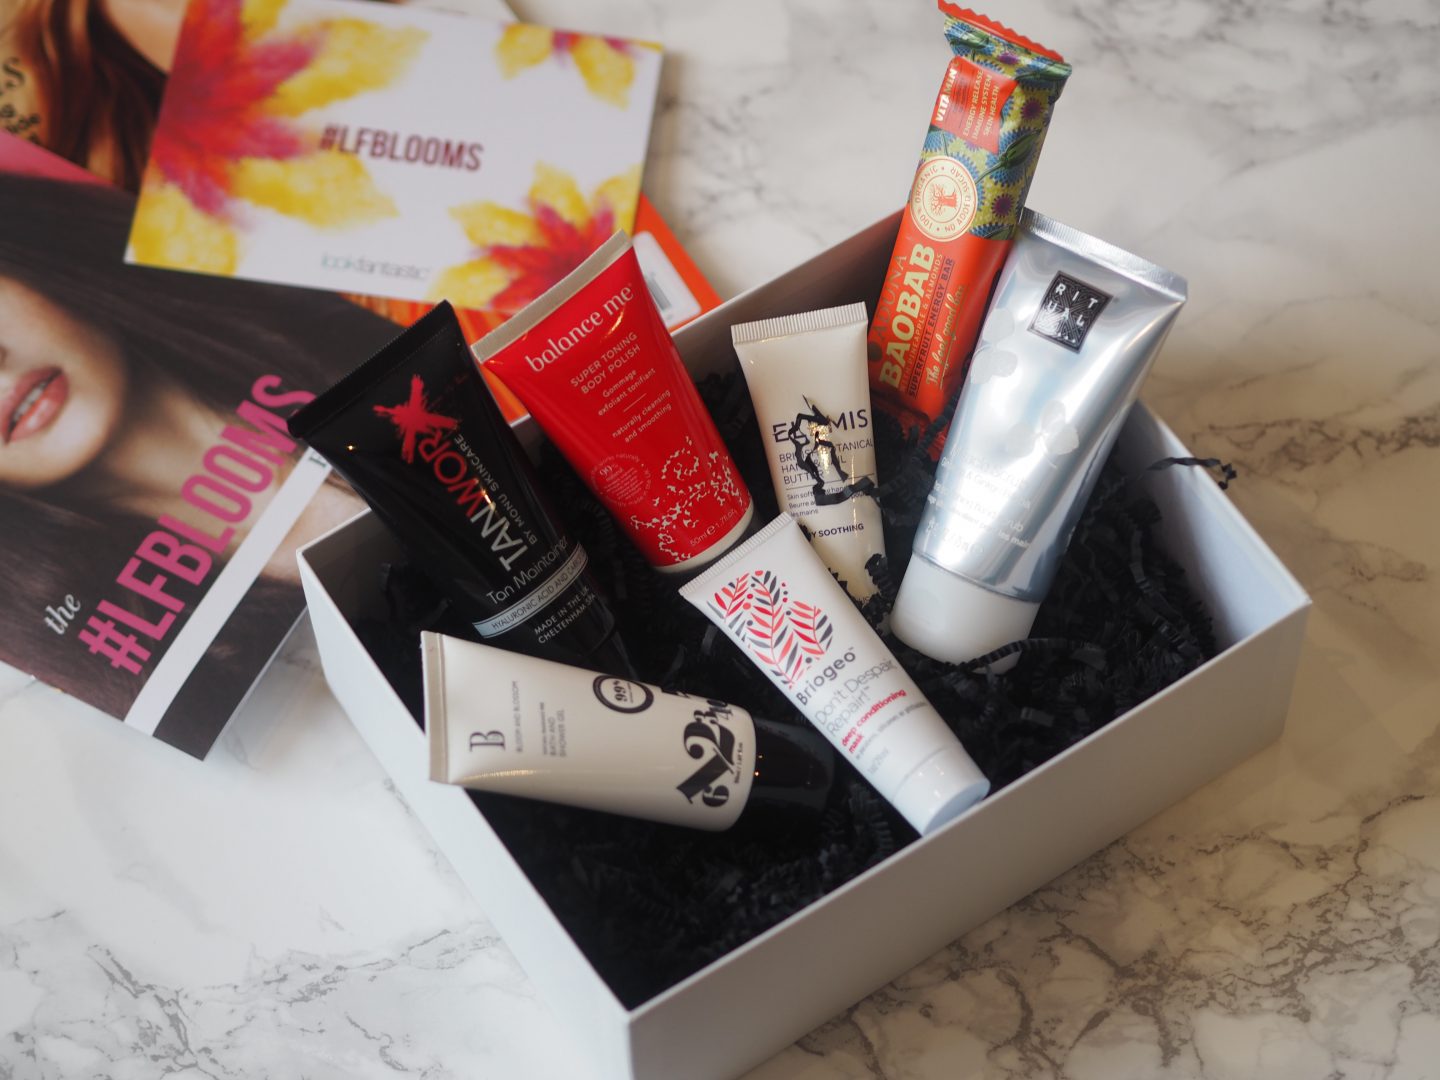 Unboxing Lookfantastic #LFBLOOMS Beauty Box!